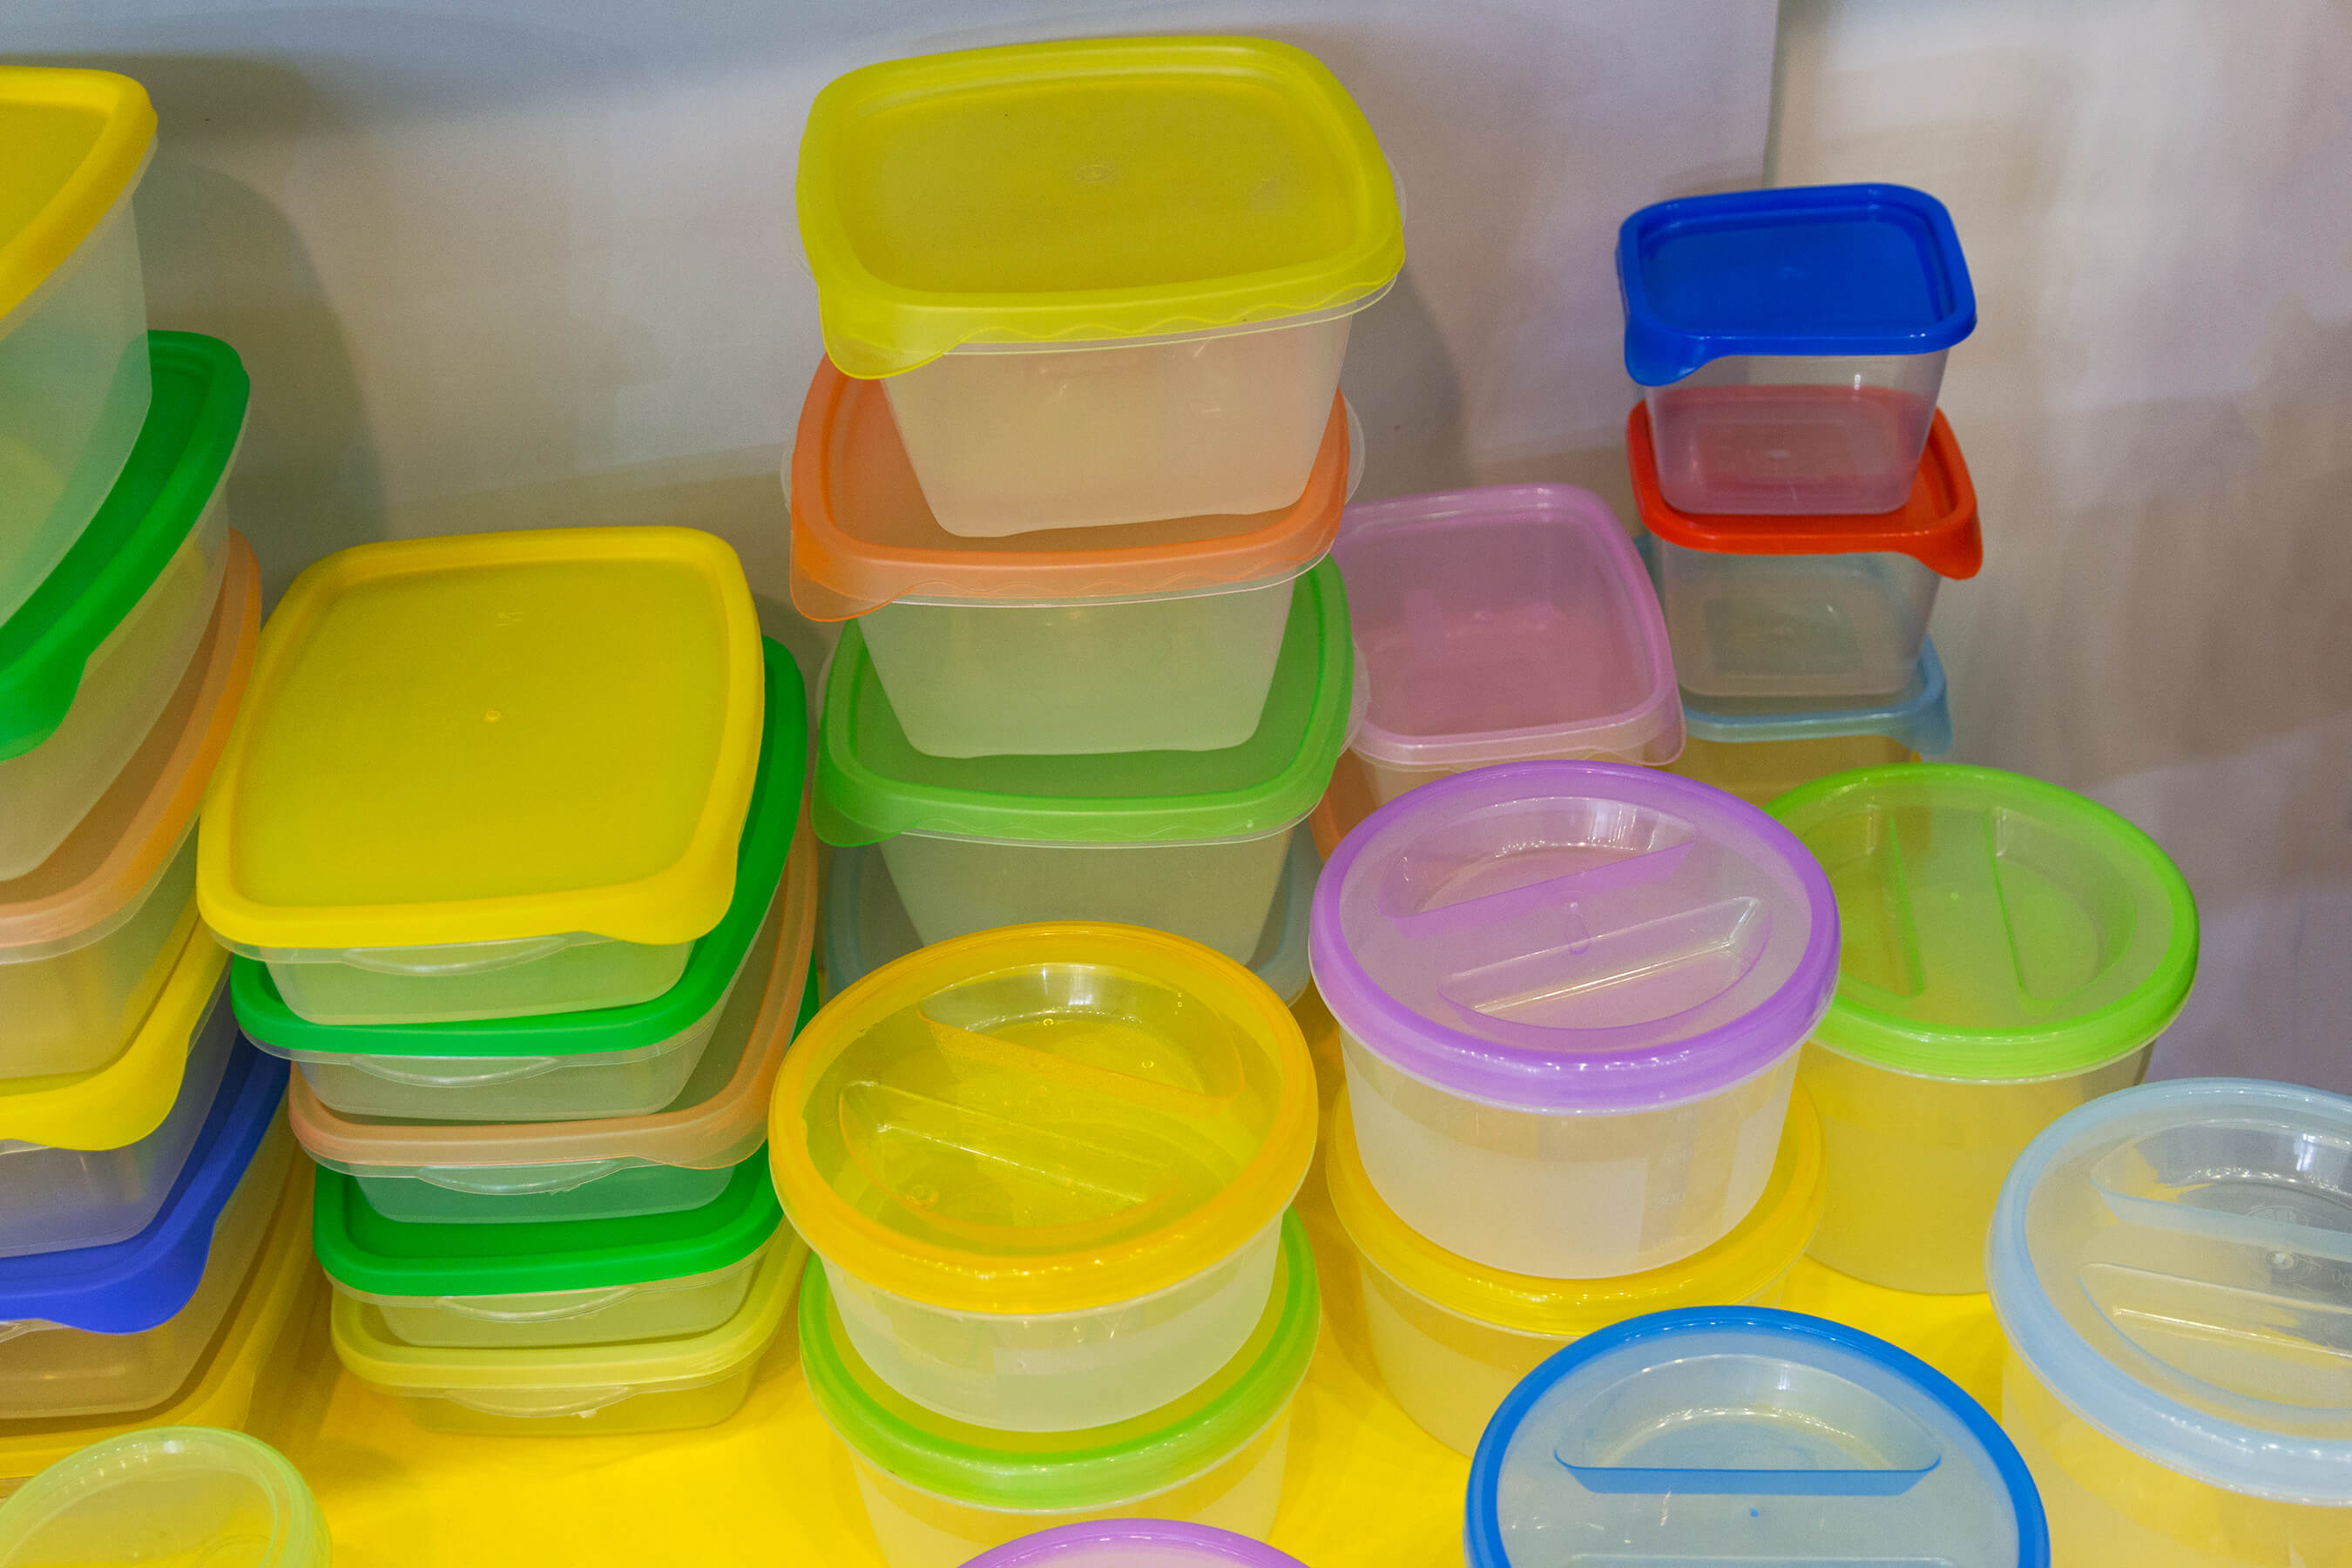 Food Storage Canisters vs. Plastic Bags: Which Is Better for Food